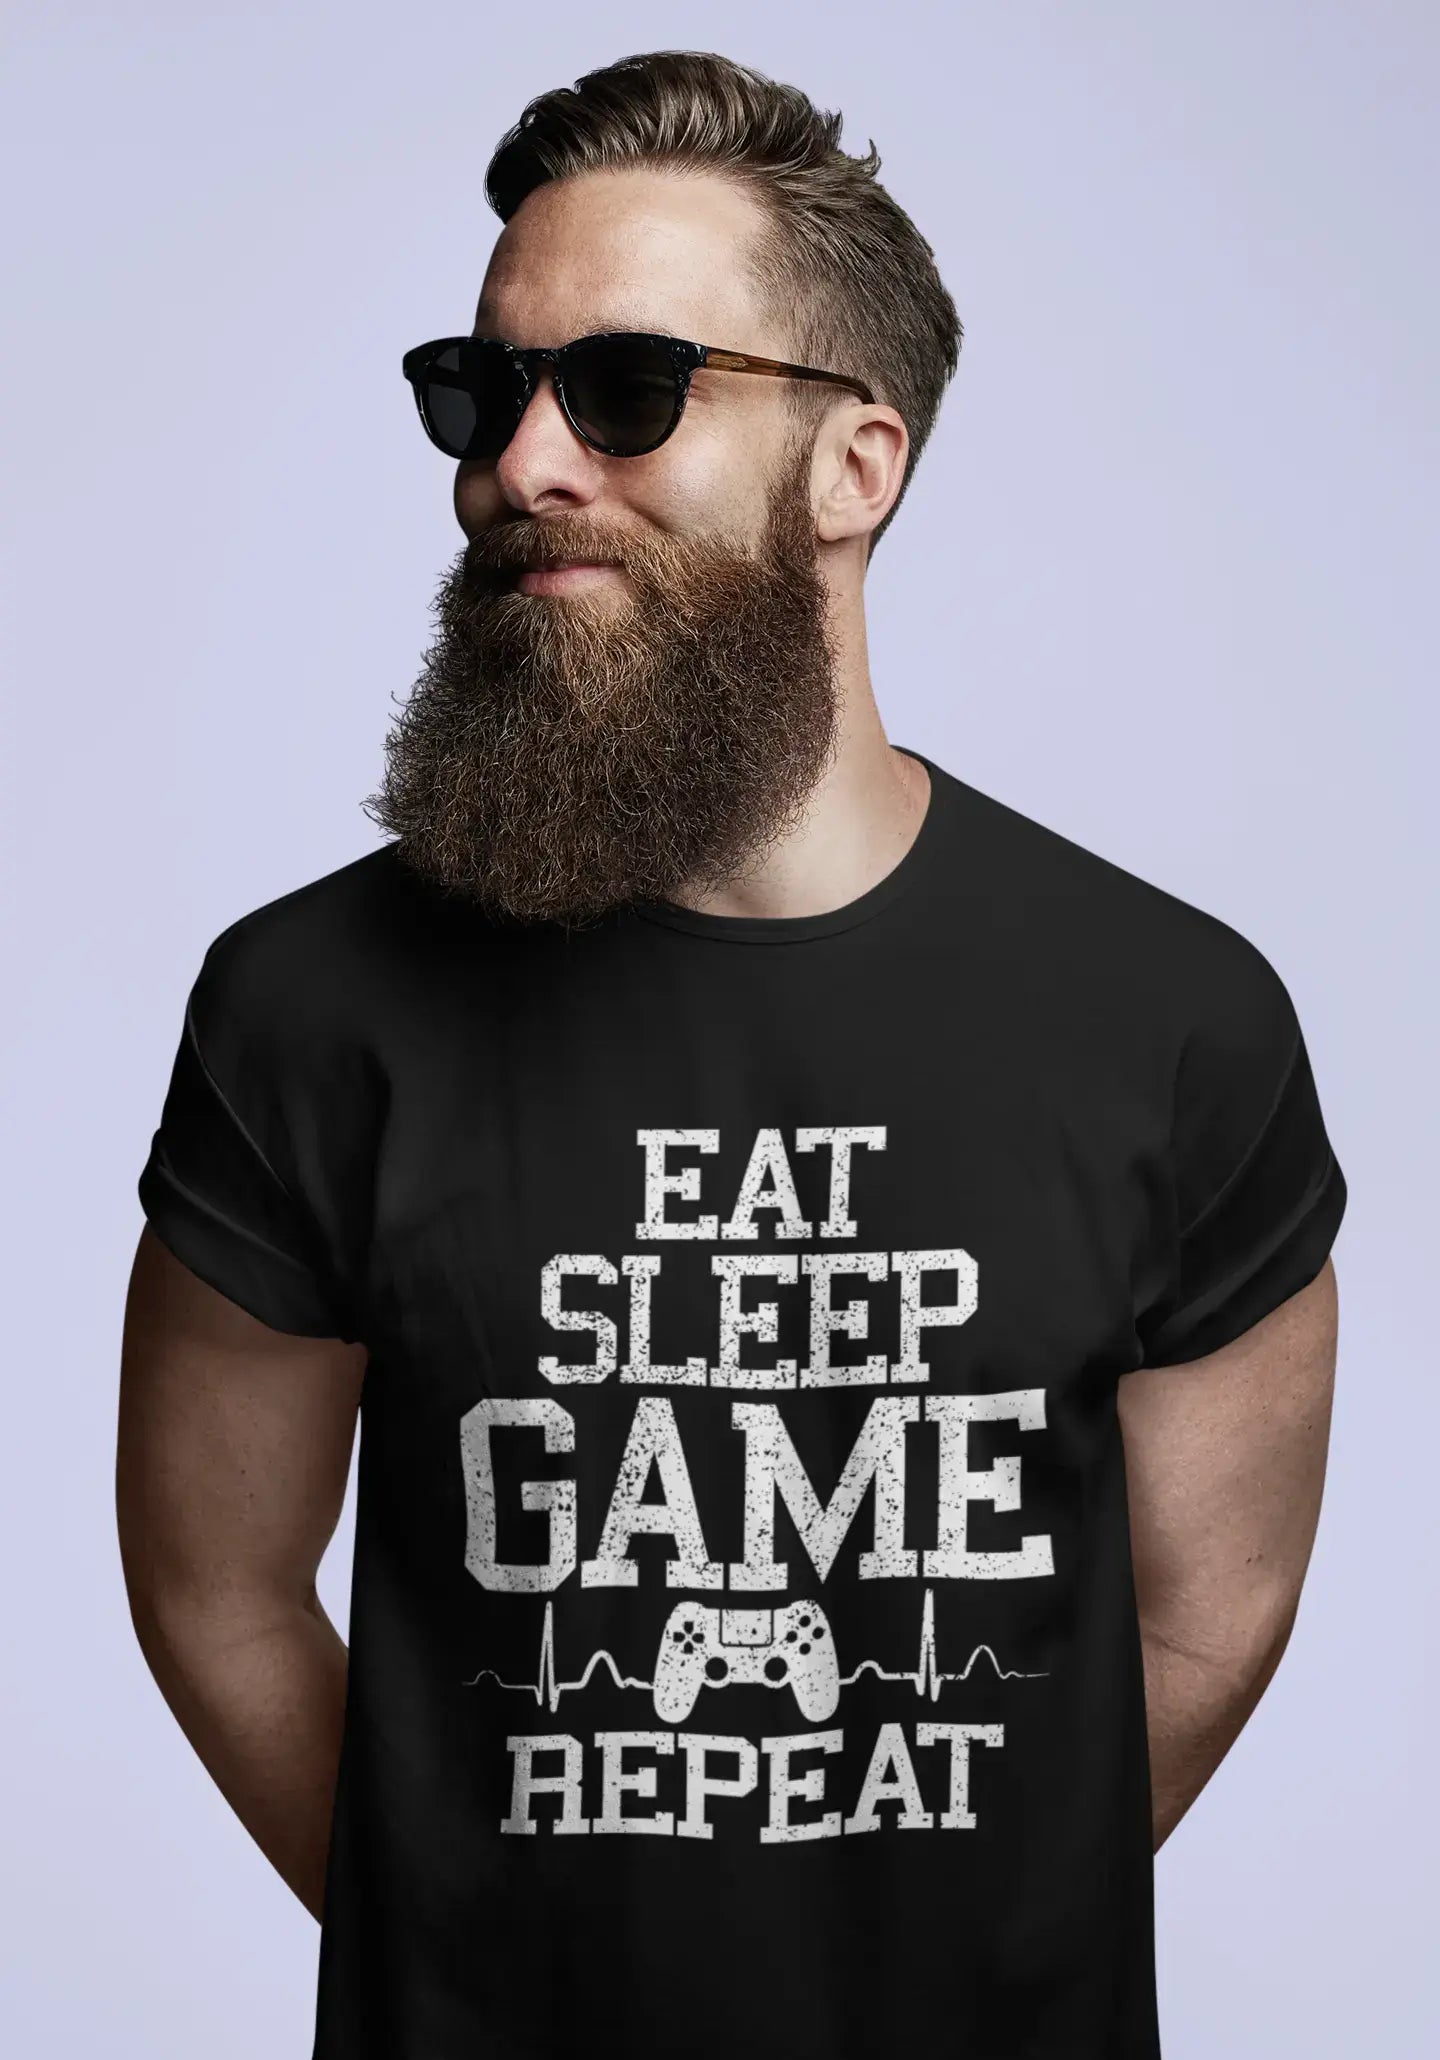 ULTRABASIC Men's T-Shirt Eat Sleep Game Repeat - Gaming Funny Quote - Gift for Gamers